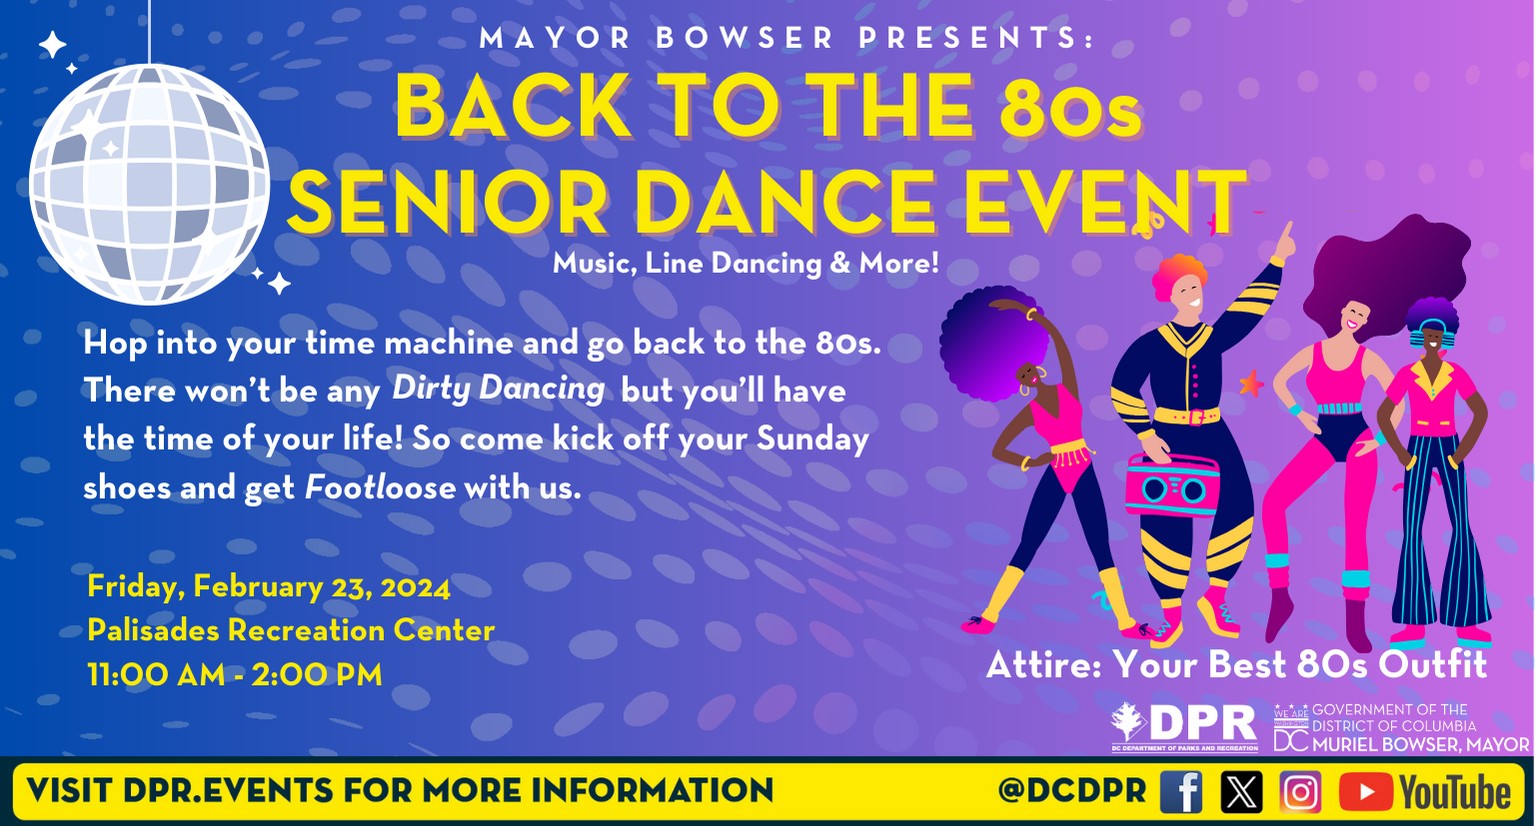 Mayor Bowser Presents: Back to the 80s Senior Dance Event - Around